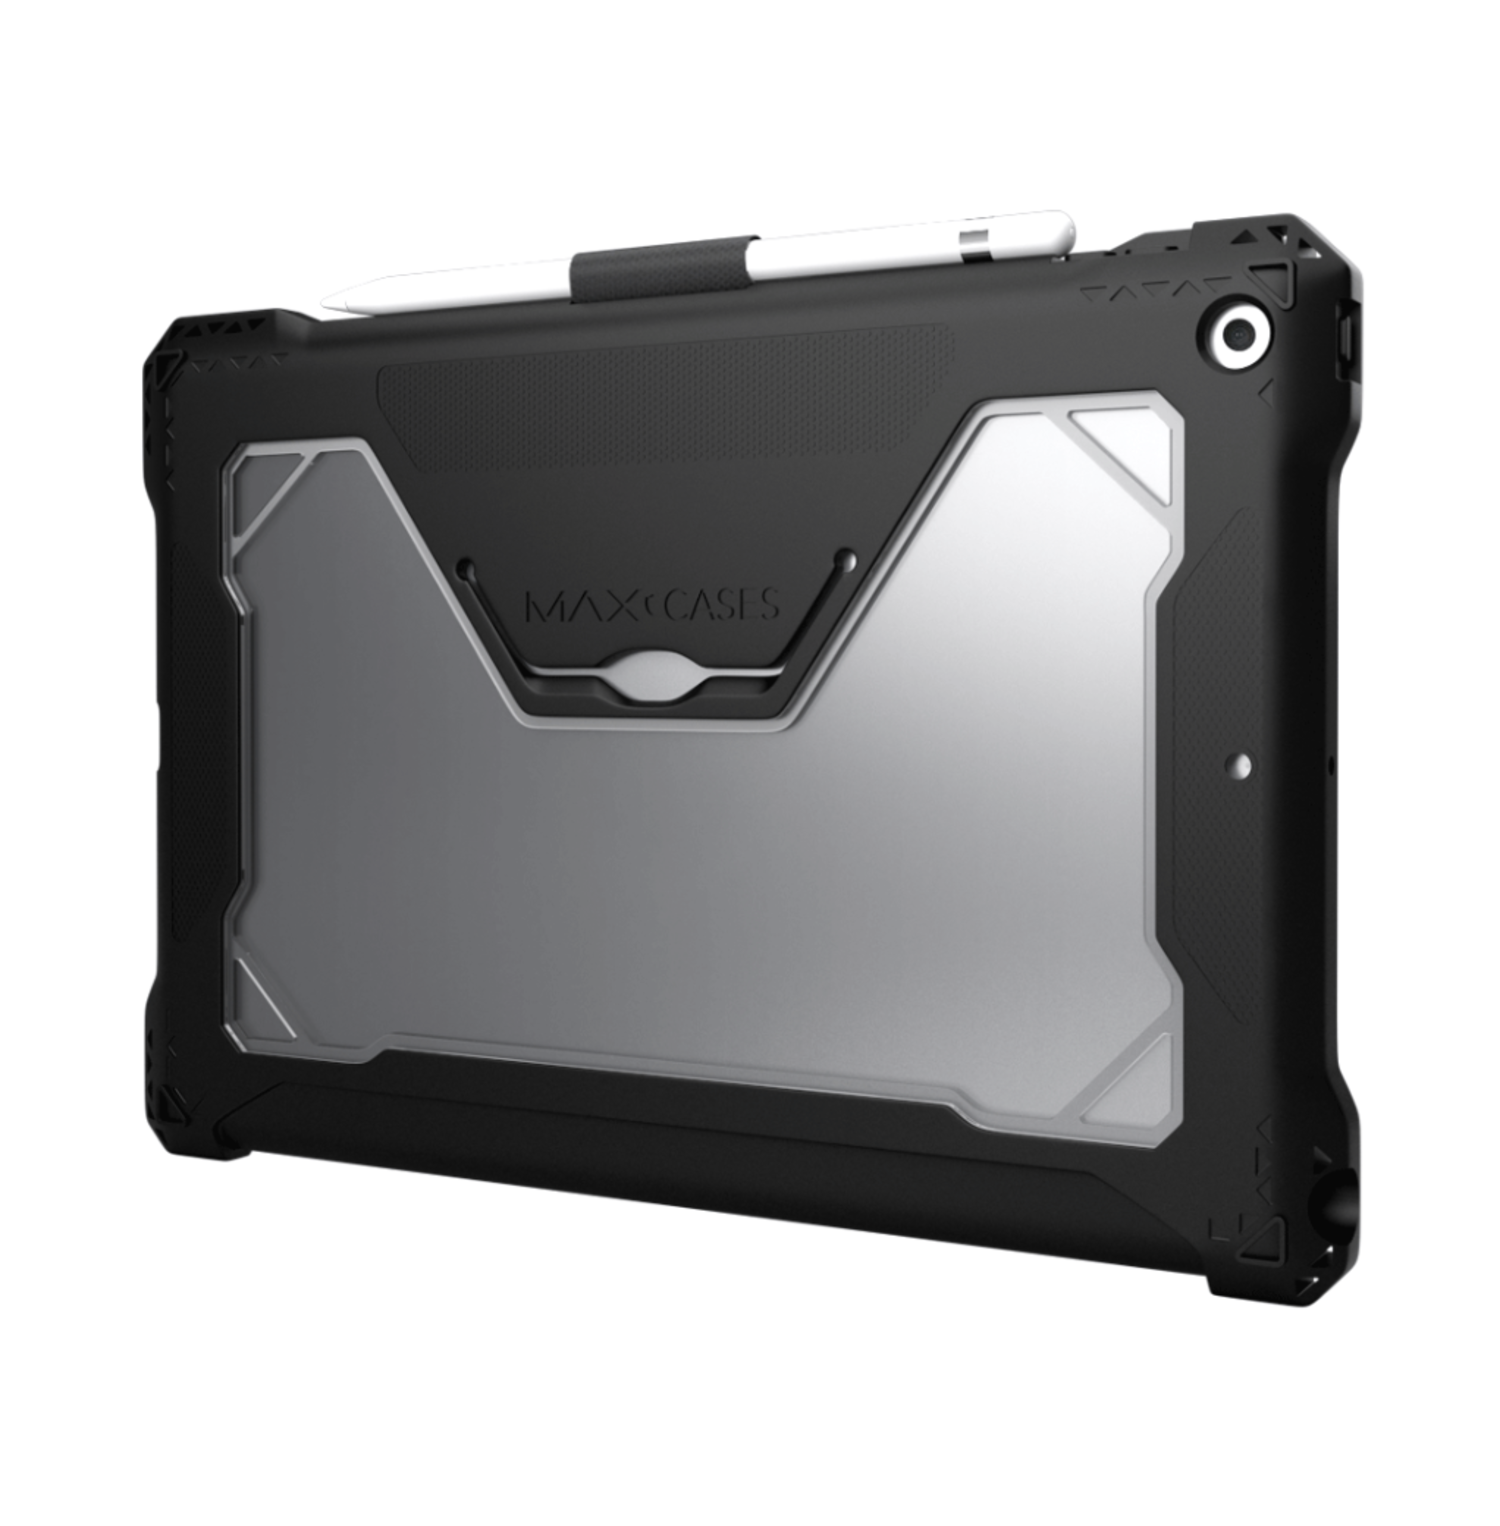 ipad 2 carrying cases